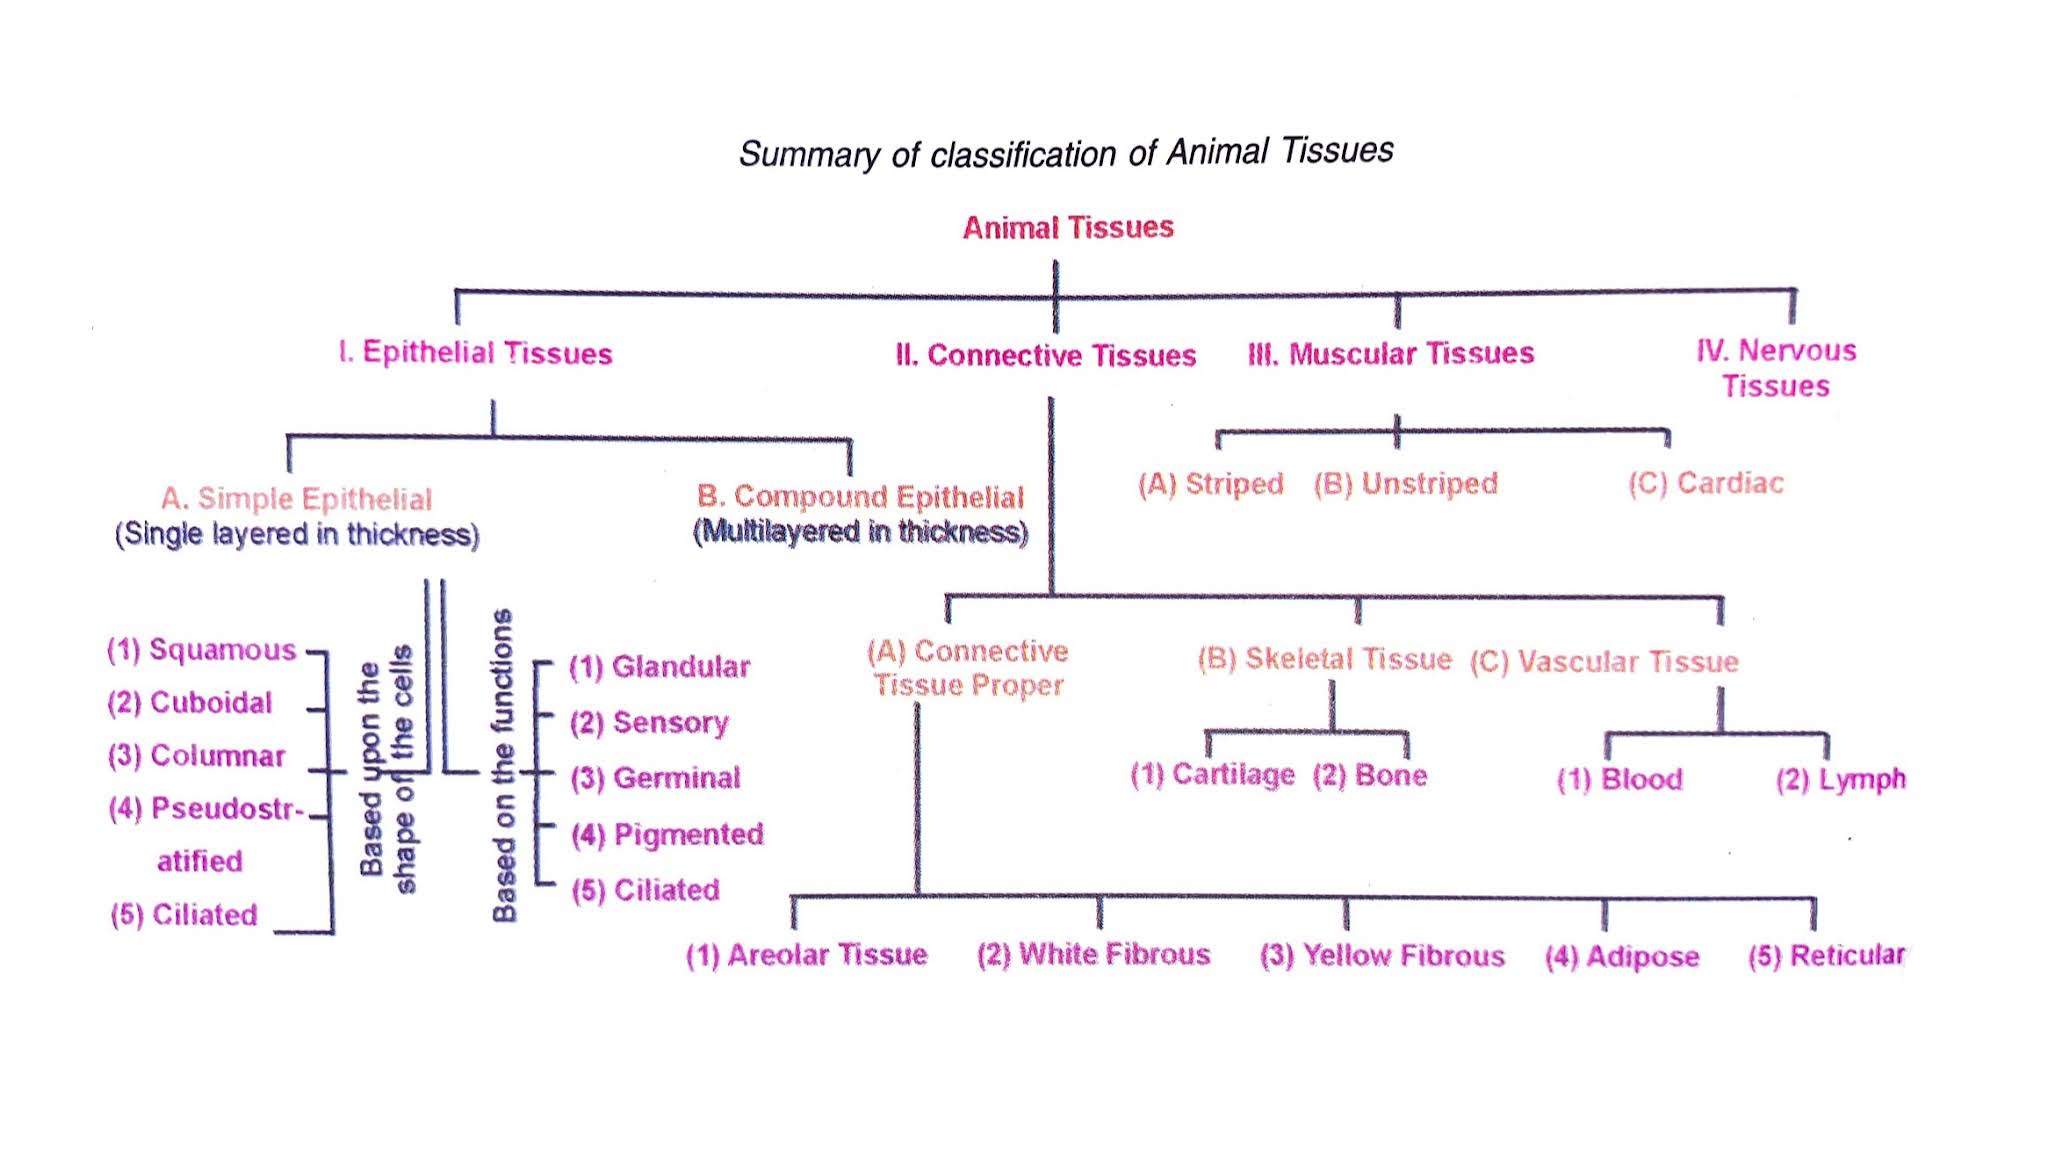 Types of Animal Tissues - Their Structure & Functions - ArticlesBazar